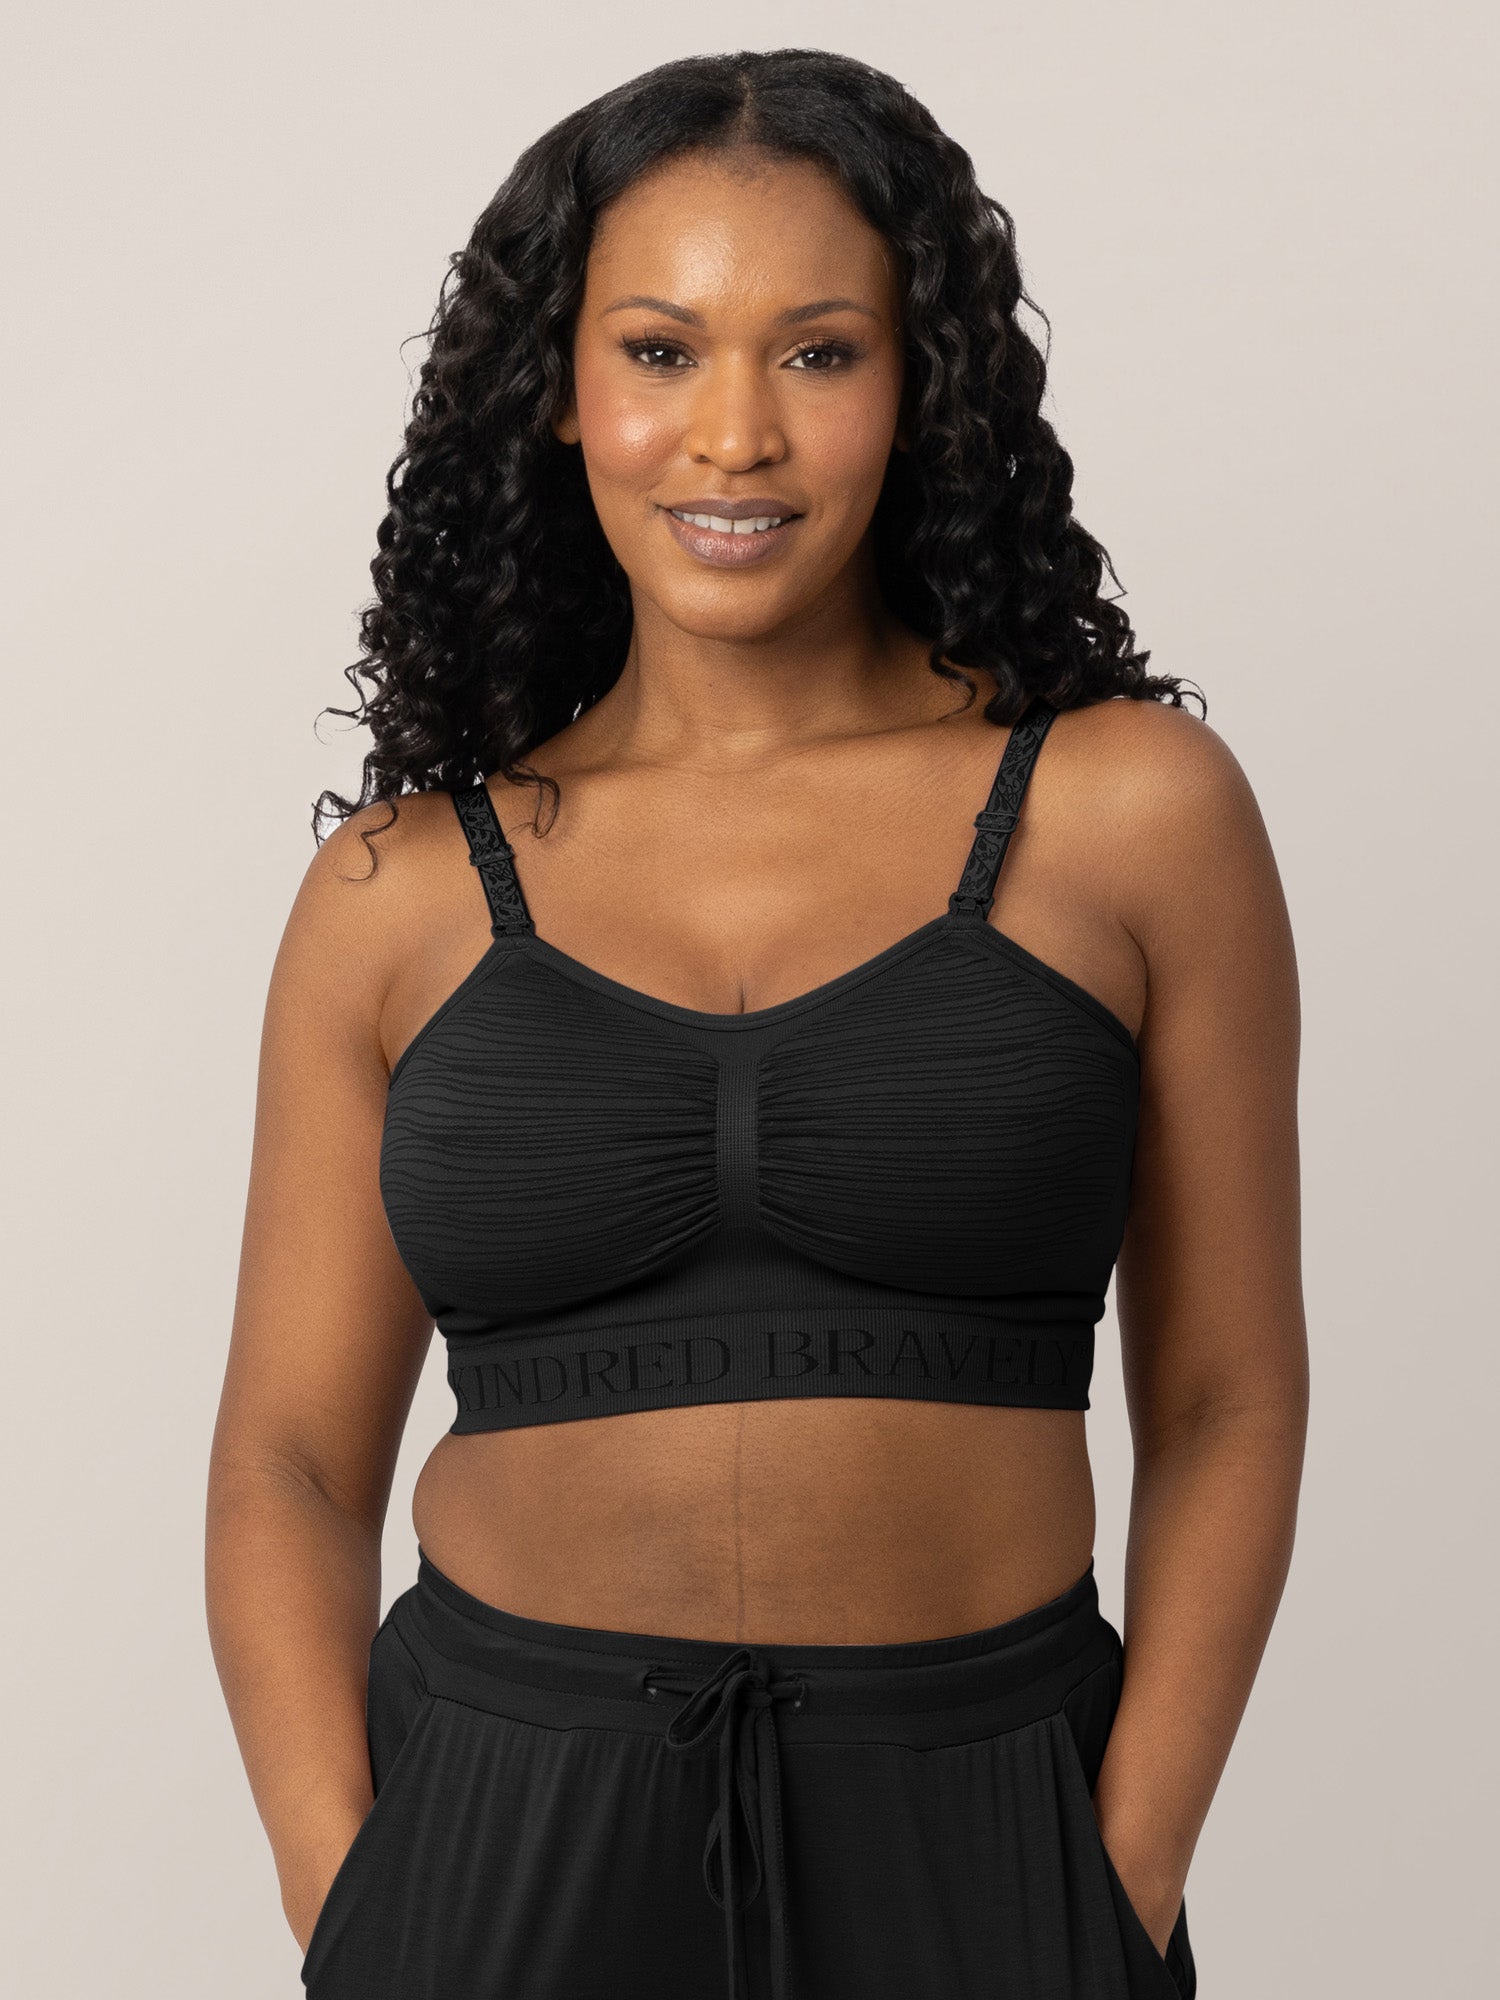 Model wearing the Sublime® Hands-Free Pumping & Nursing Bra in Black with her hands in her pockets.